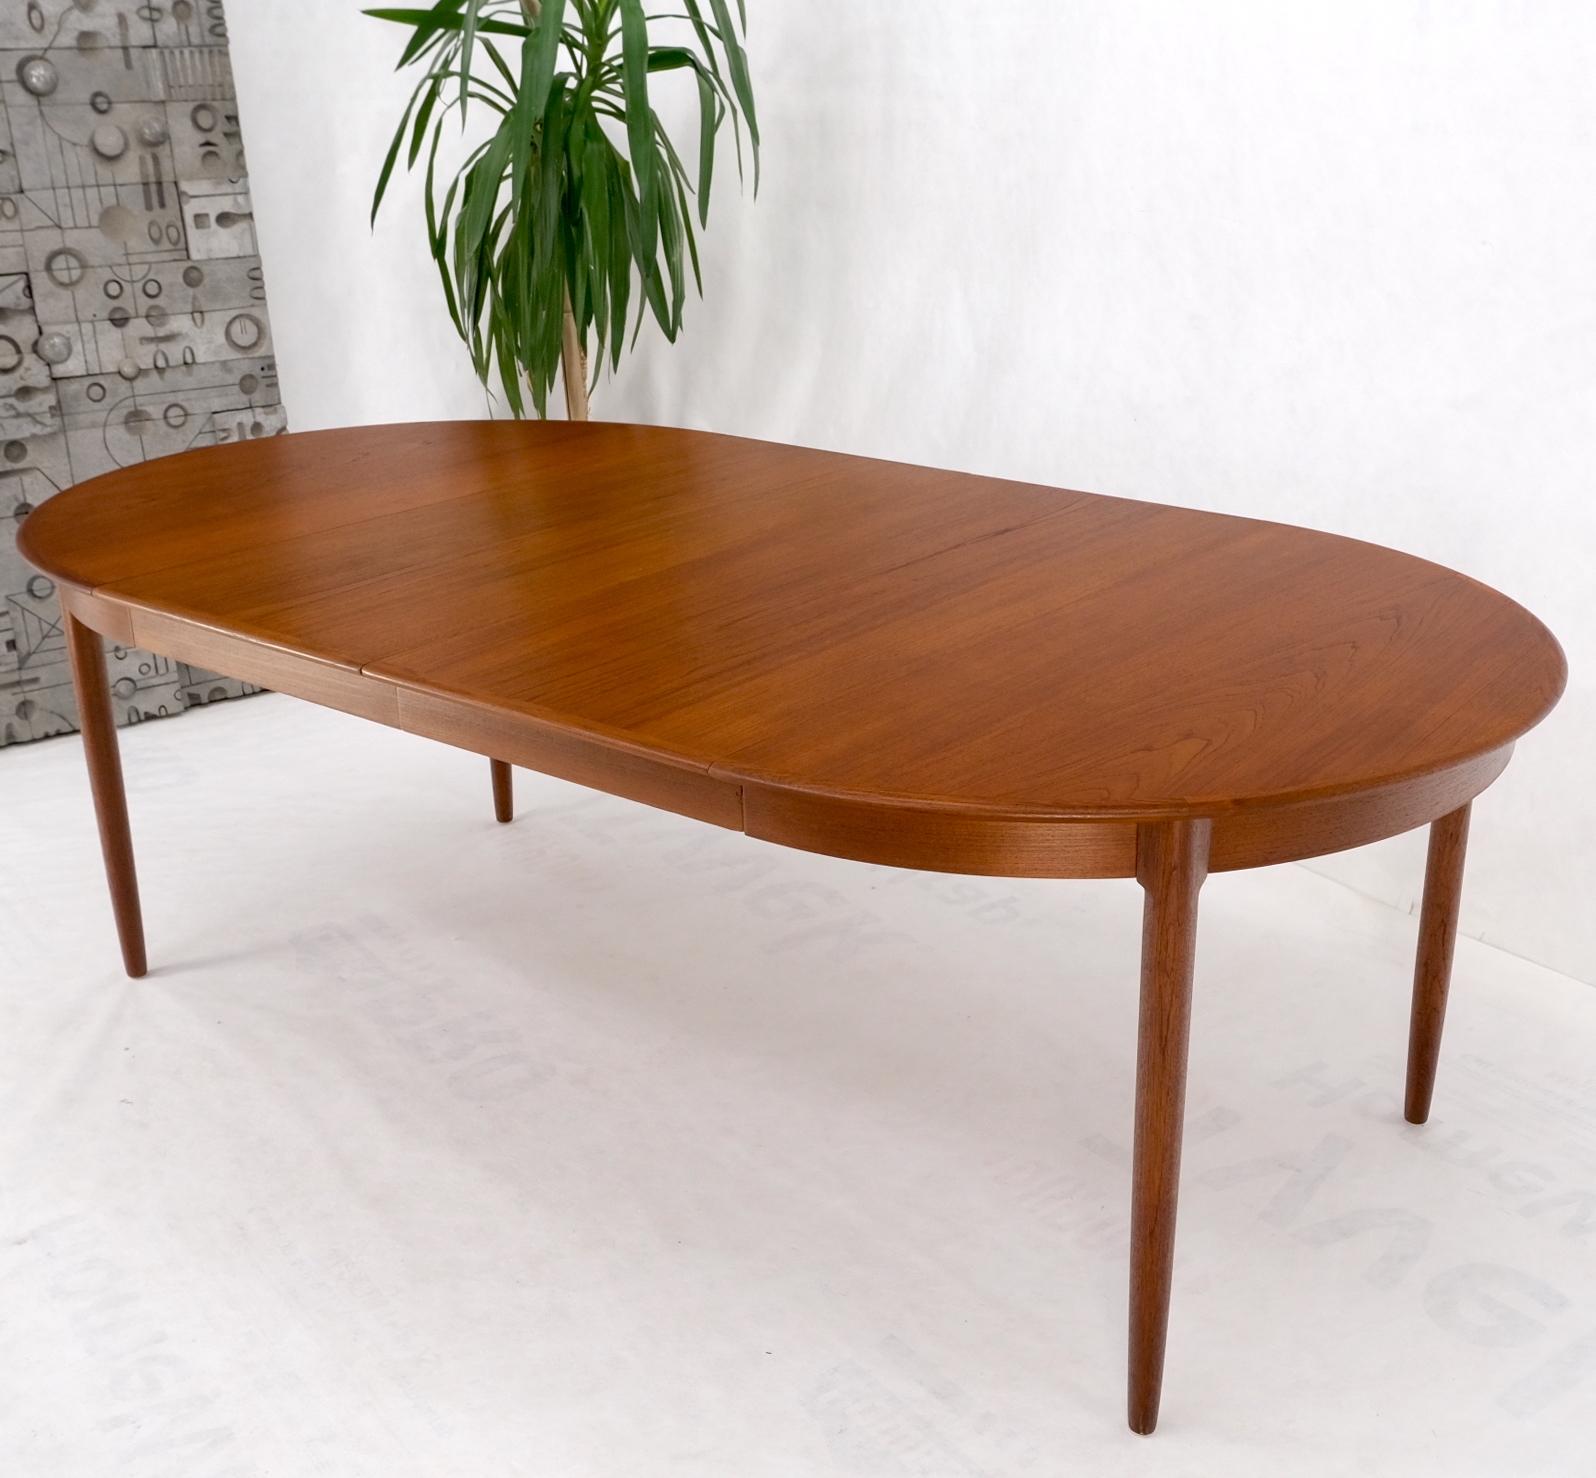 Danish Teak Mid-Century Modern Round Dining Table w/ Two Extension Boards Leafs For Sale 8